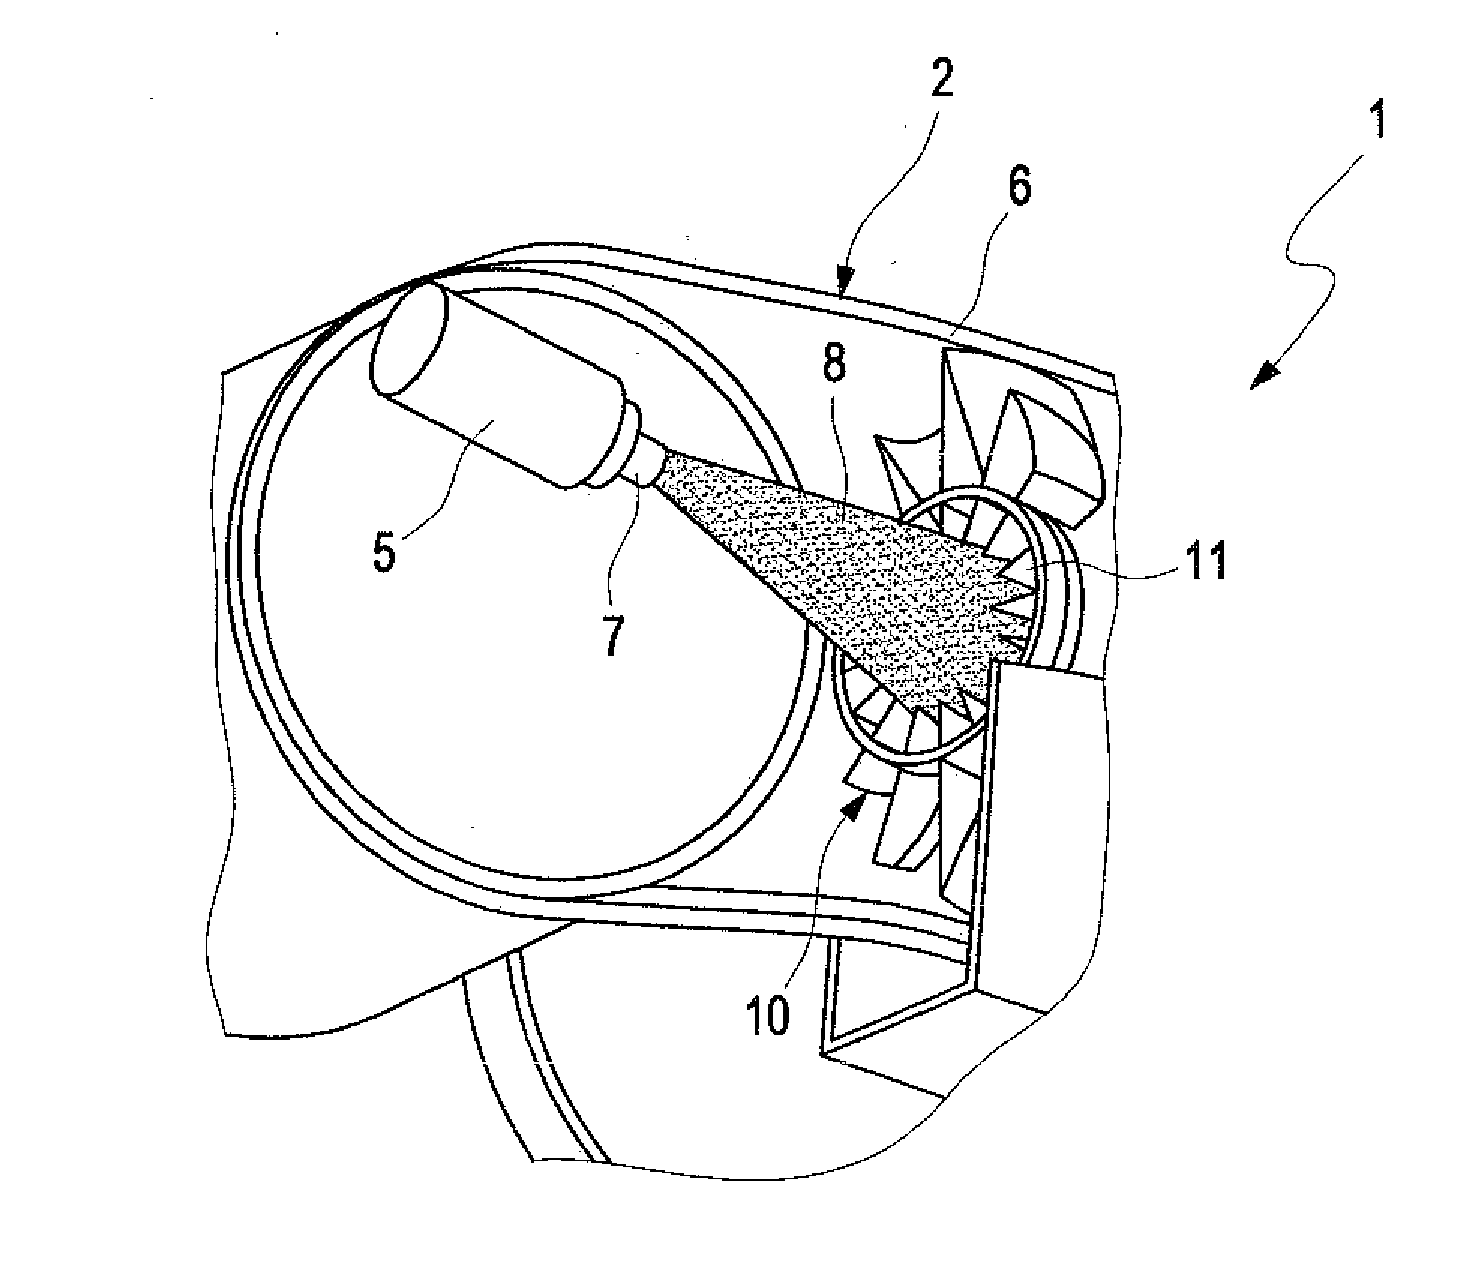 Exhaust system of an internal combustion engine with mixer for a liquid reductant